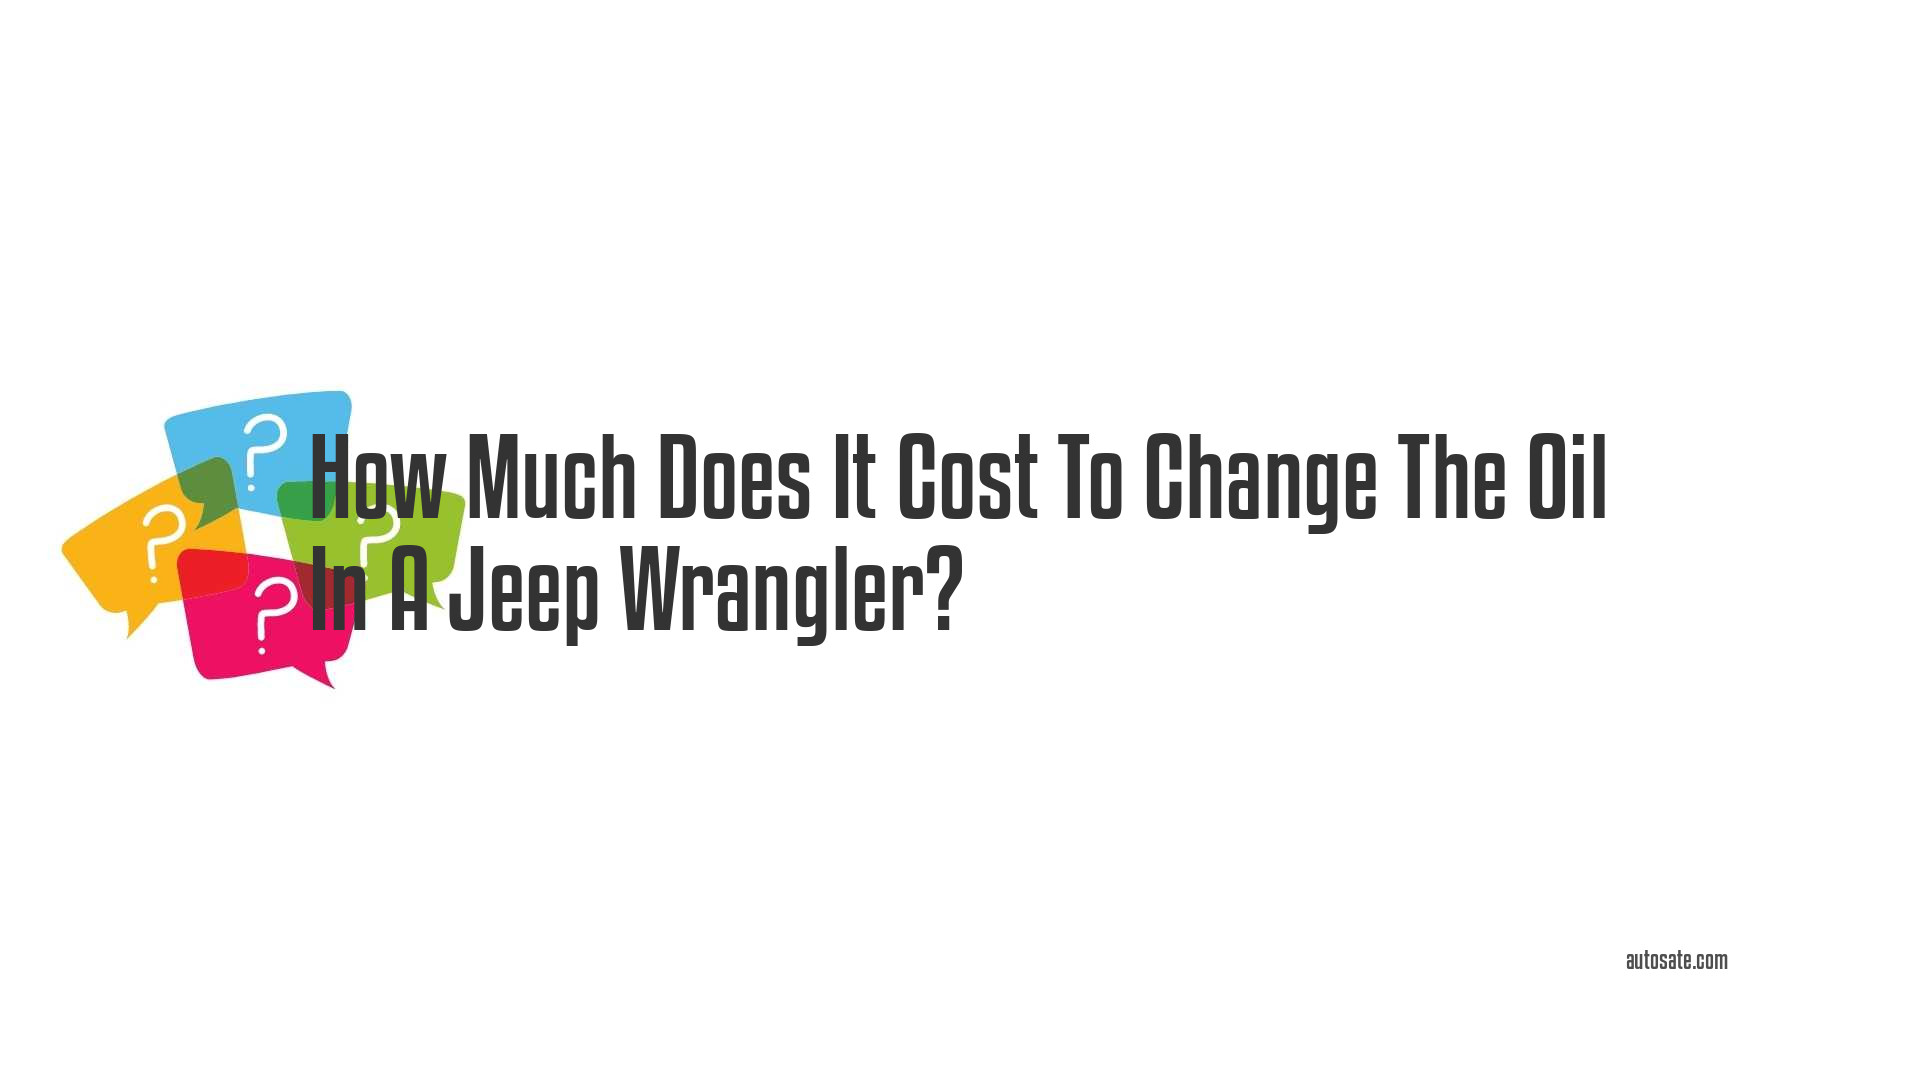 How Much Does It Cost To Change The Oil In A Jeep Wrangler?